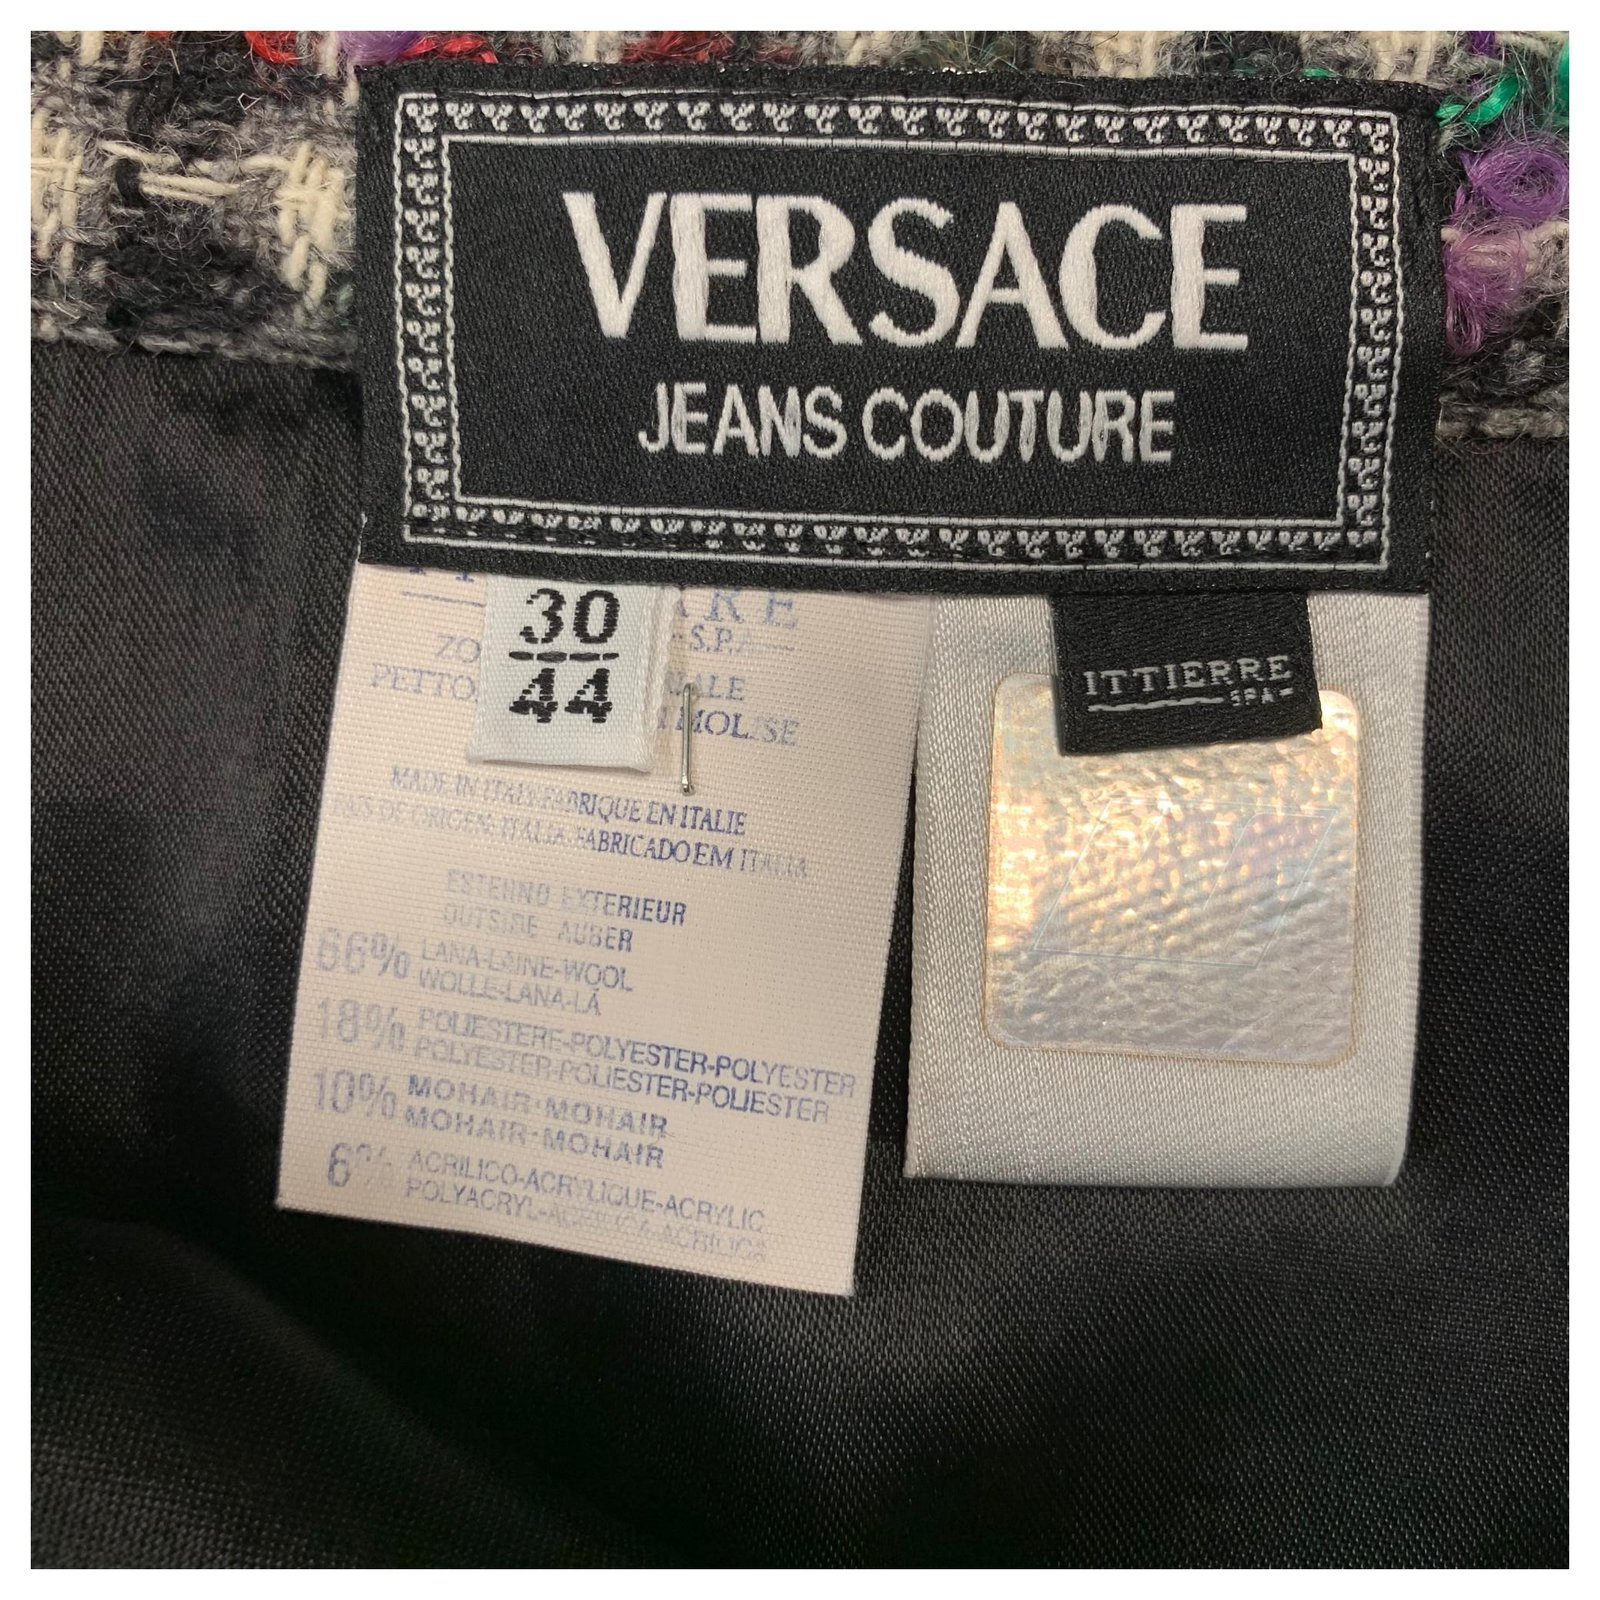 Versace Jeans Couture Label